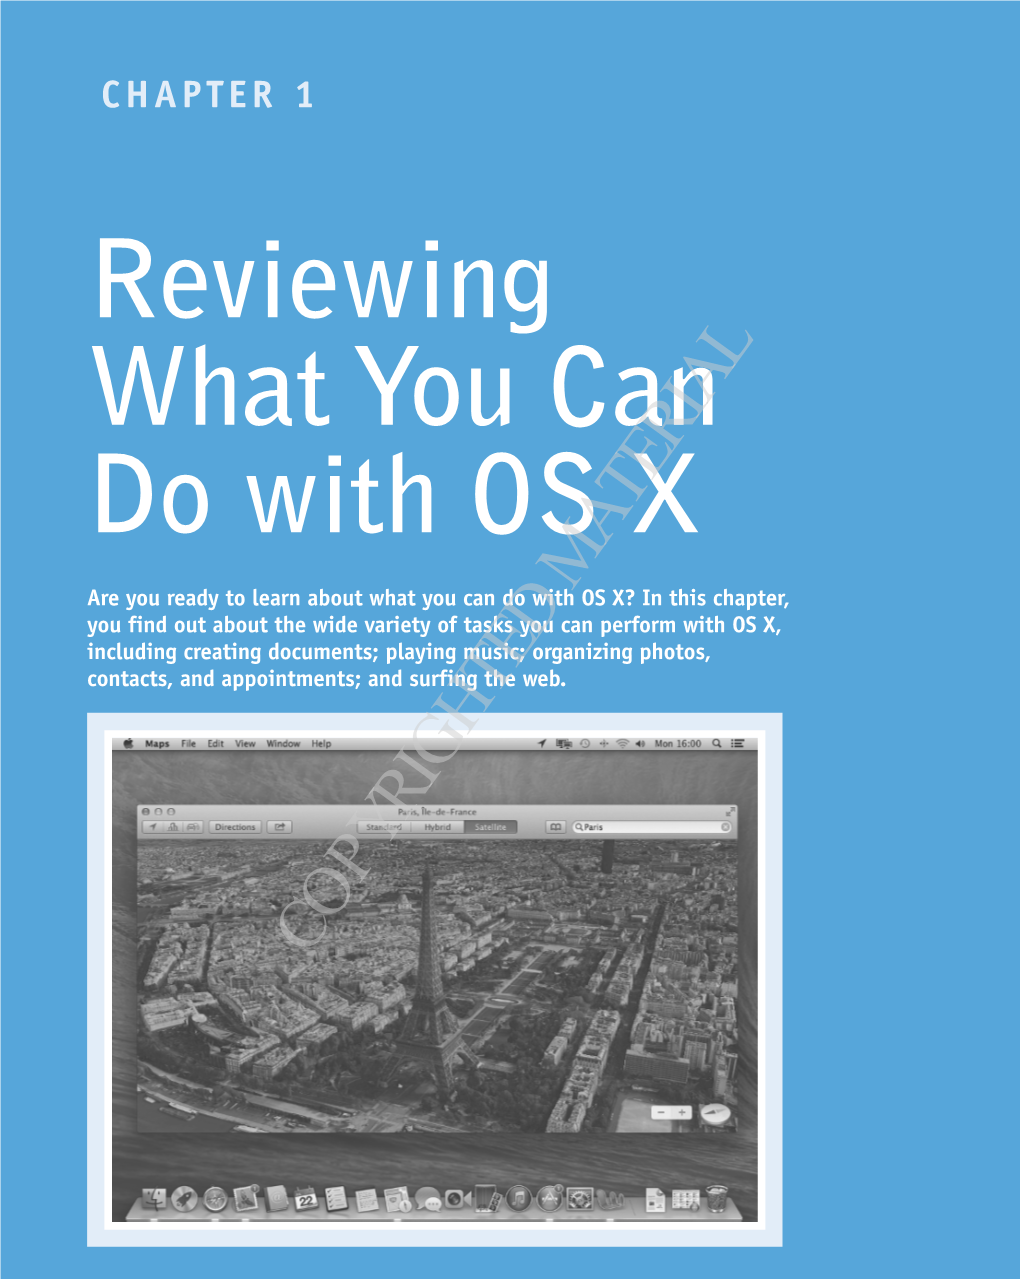 Reviewing What You Can Do with OS X